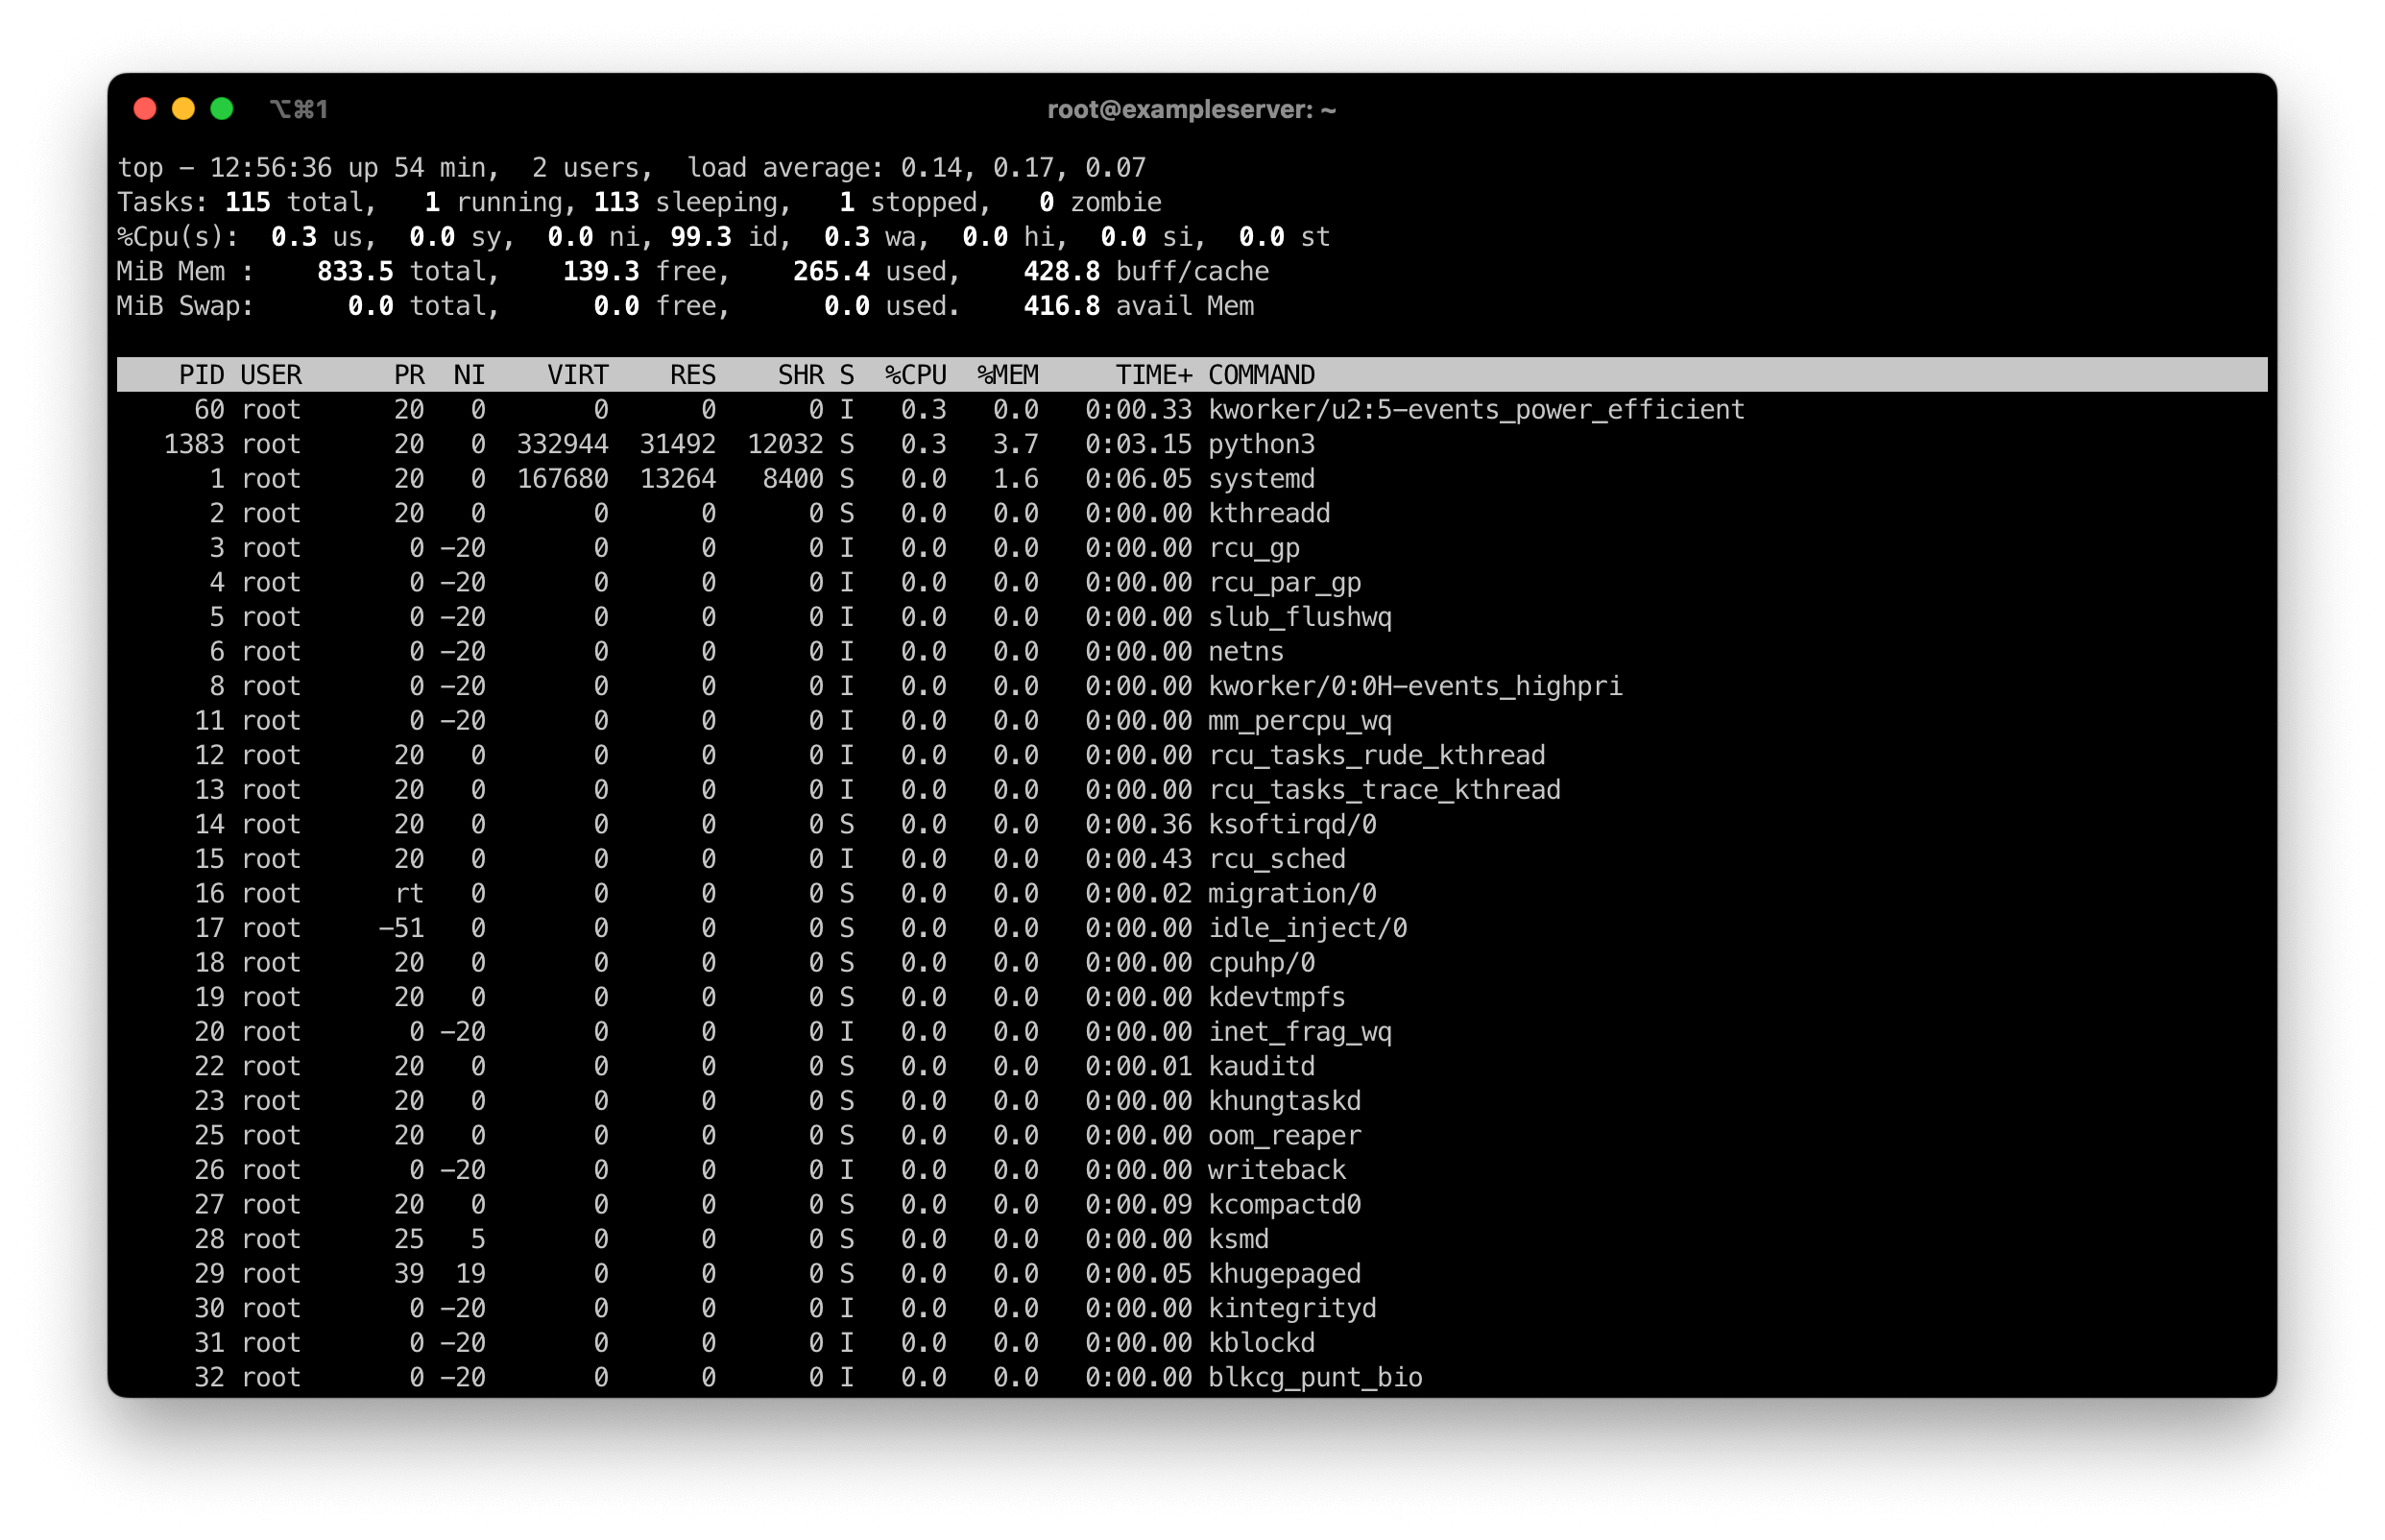 Screenshot of a Linux terminal showing the output of the top command